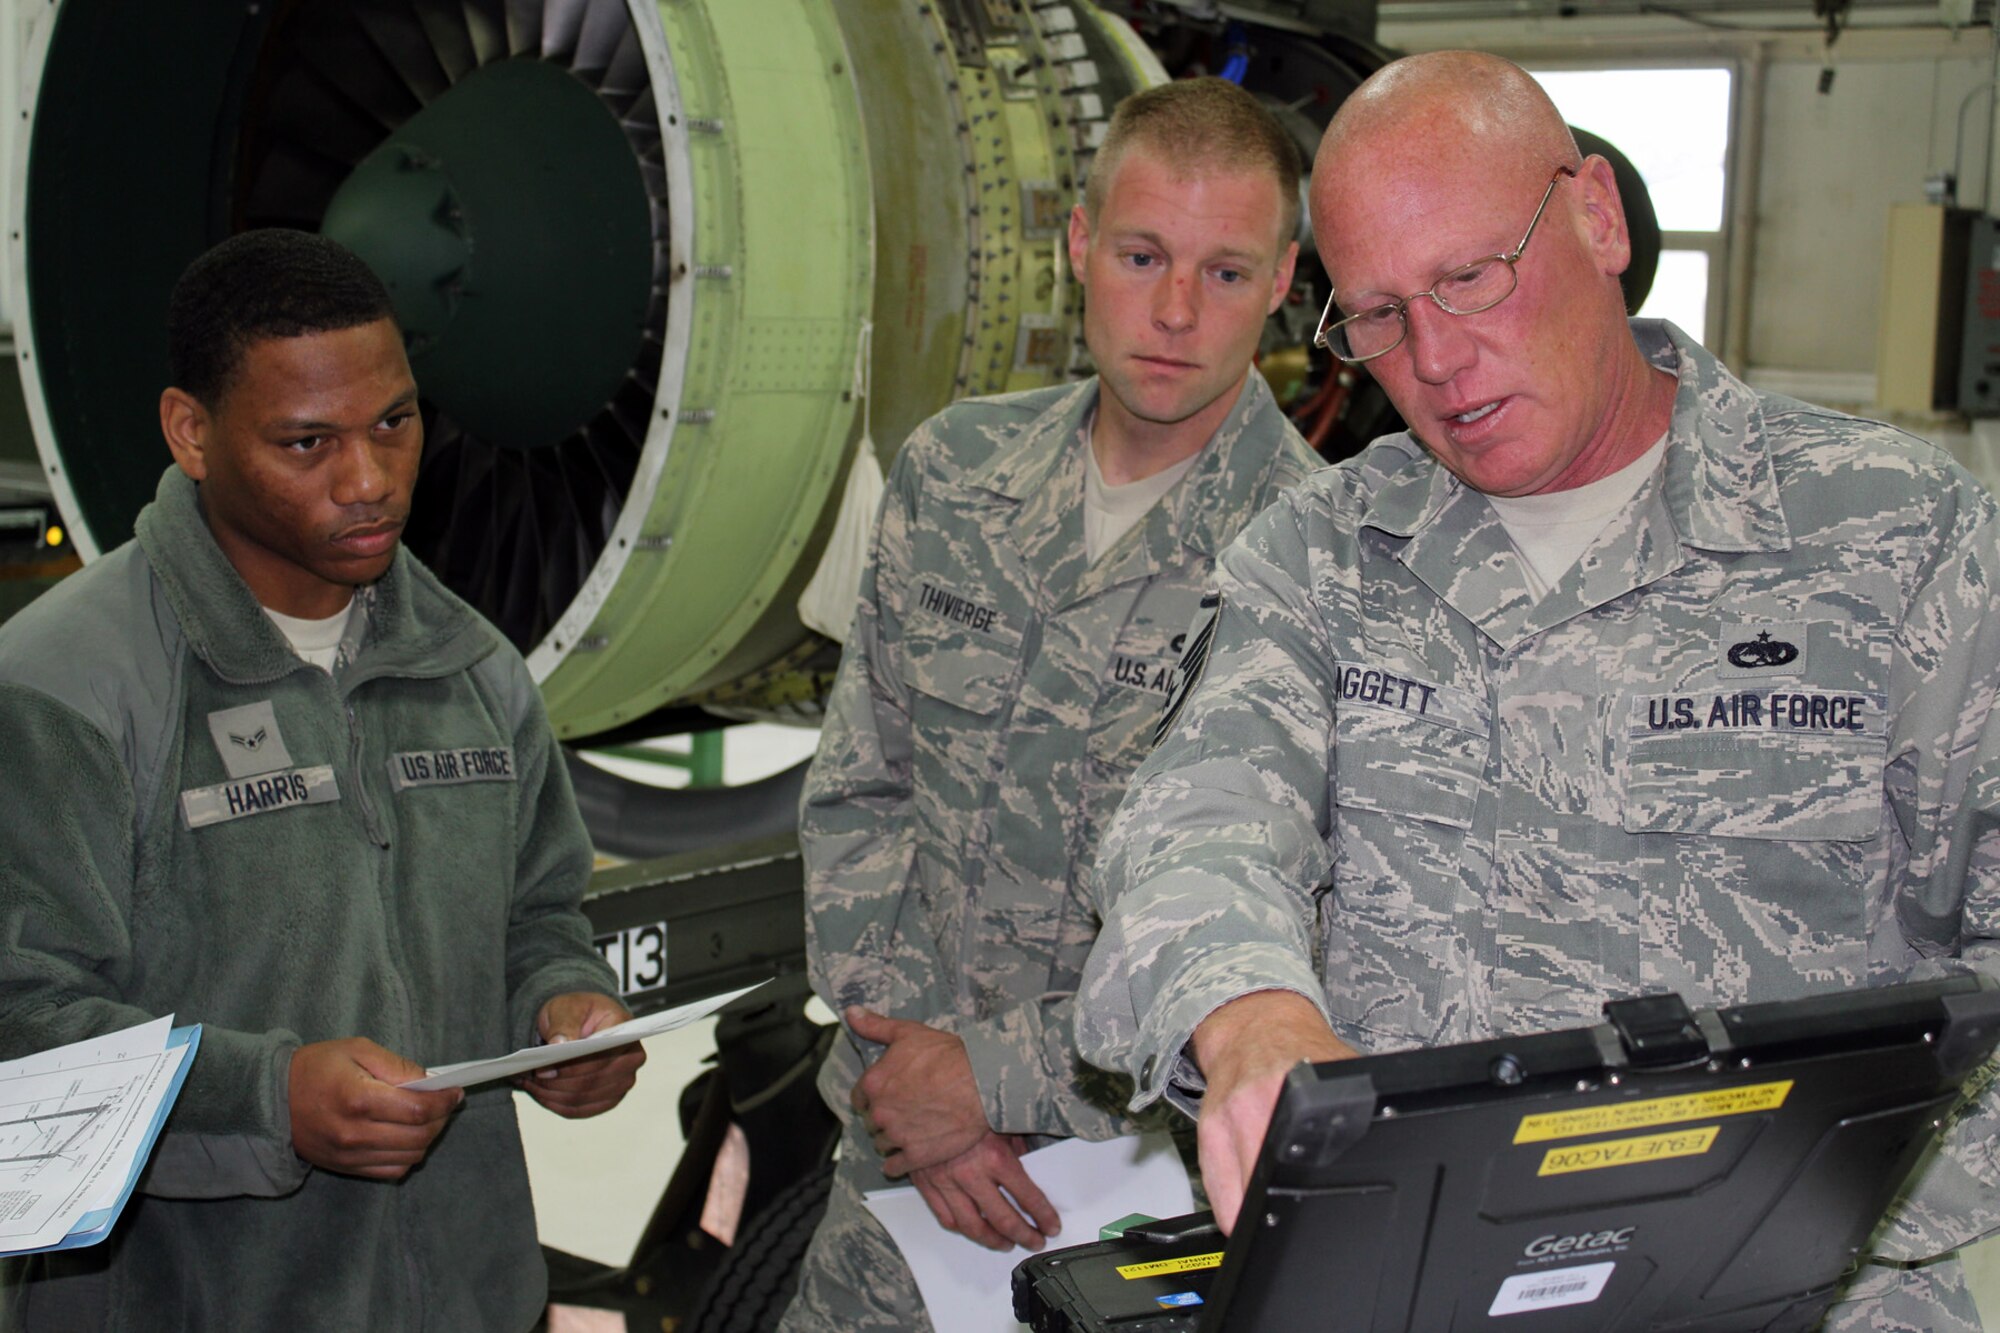 130608-Z-VA676-003 -- Airman 1st Class Justin Harris and Senior Airman Jody Thivierge listen as Master Sgt. Dean Daggett instructs a class on engine maintenance procedures for the A-10 Thunderbolt II at Selfridge Air National Guard Base, Mich., June 8, 2013. All three Airmen are members of the 127th Maintenance Squadron. (U.S. Air National Guard photo by TSgt. Dan Heaton/ Released)